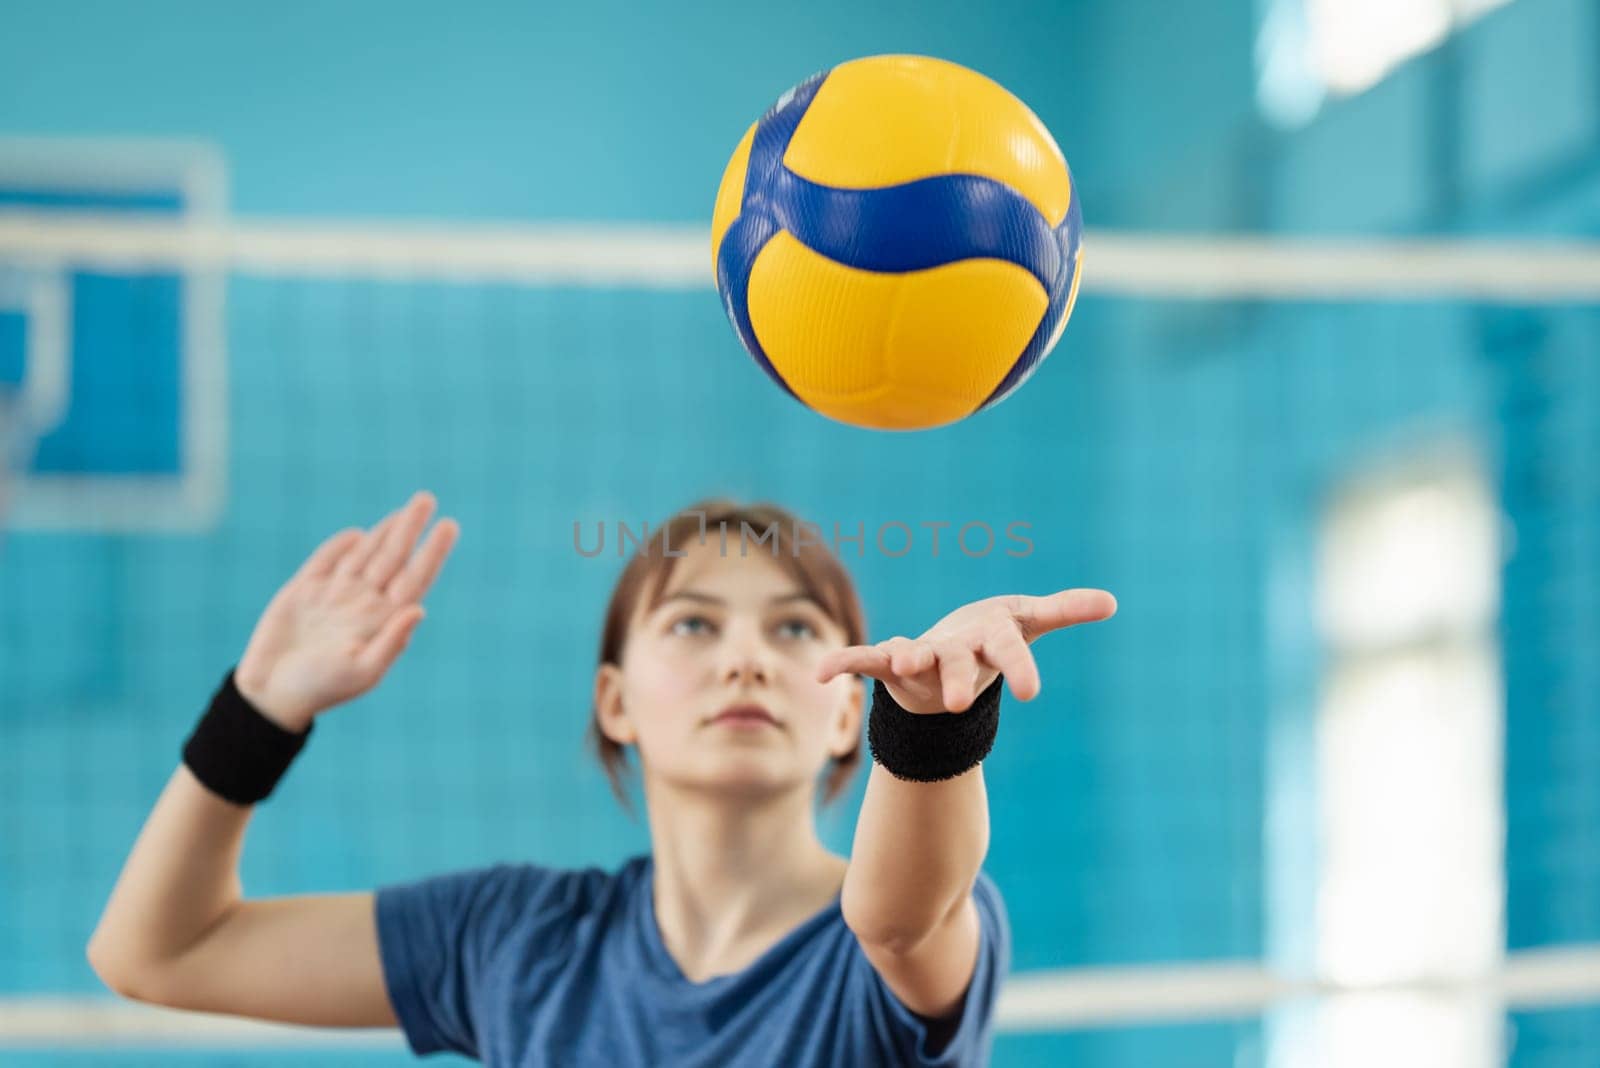 Learner practicing fundamental volleyball skill, serving the ball to opponents side